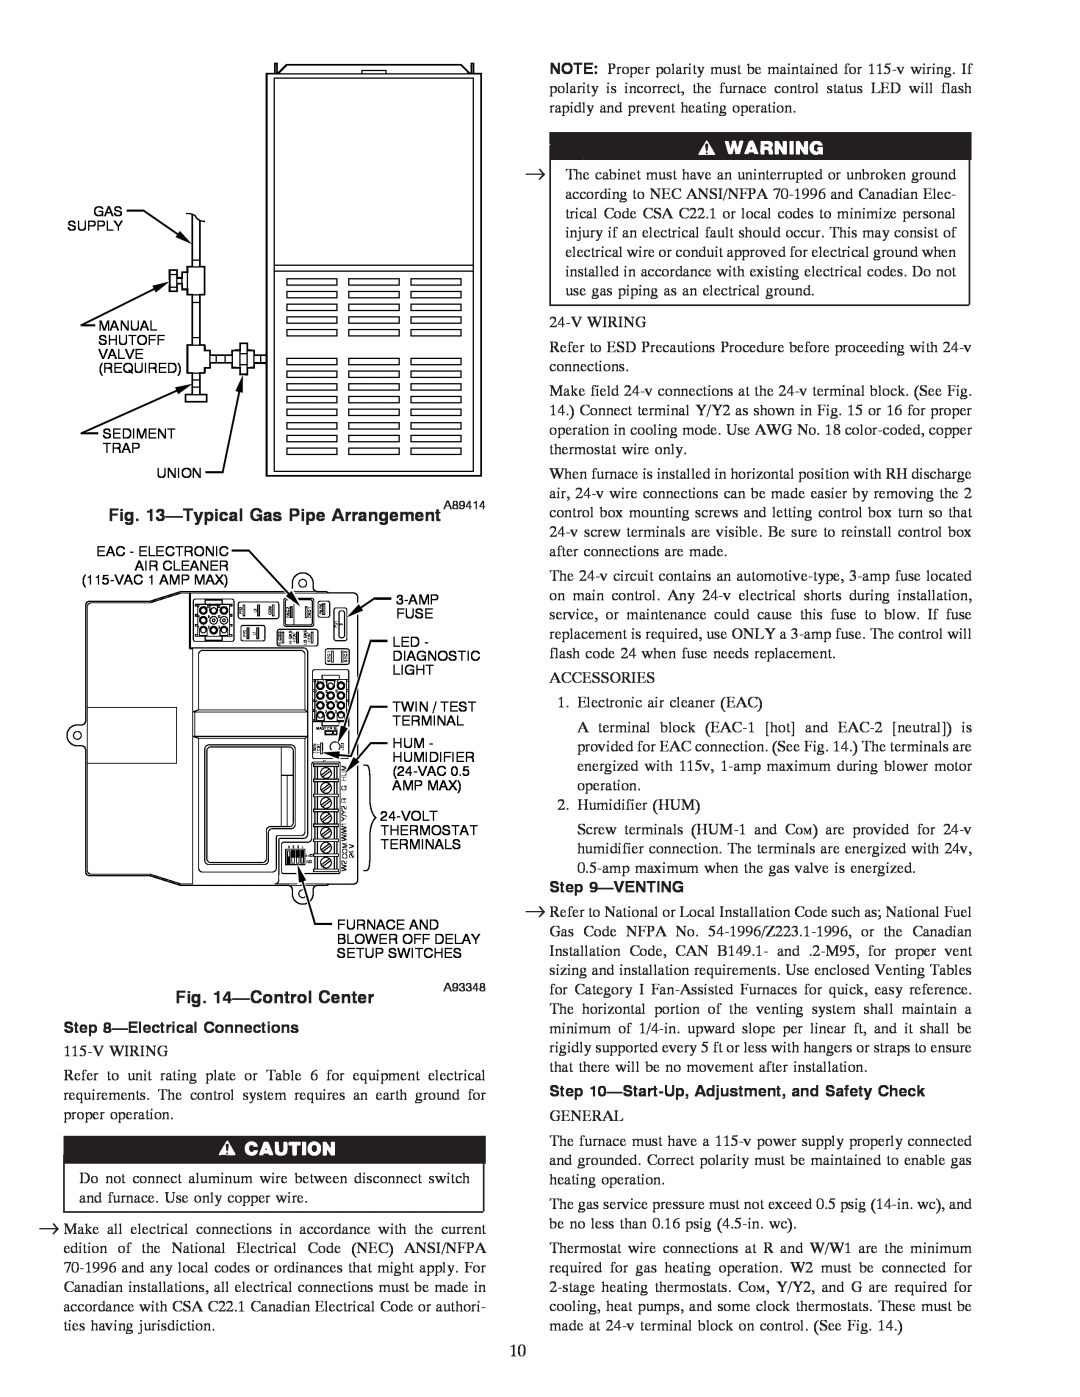 Carrier 58TMA operating instructions TypicalGas Pipe Arrangement A89414, ControlCenter, ElectricalConnections, Venting 